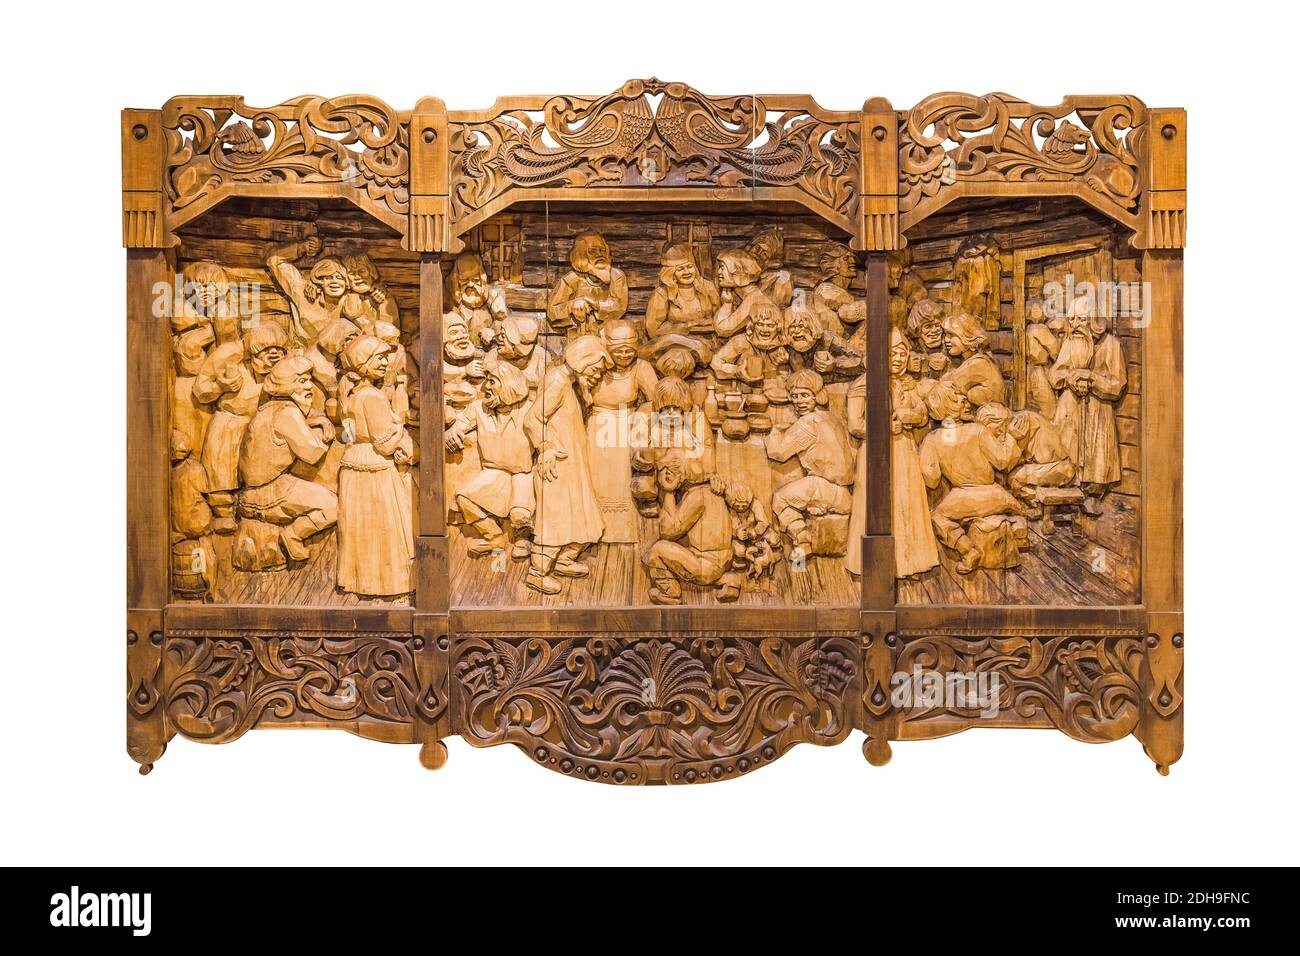 Sortavala, Russia - July 29, 2020: Pictures of Russian life carved from wood by the artist Kronid Gogolev in the museum Stock Photo